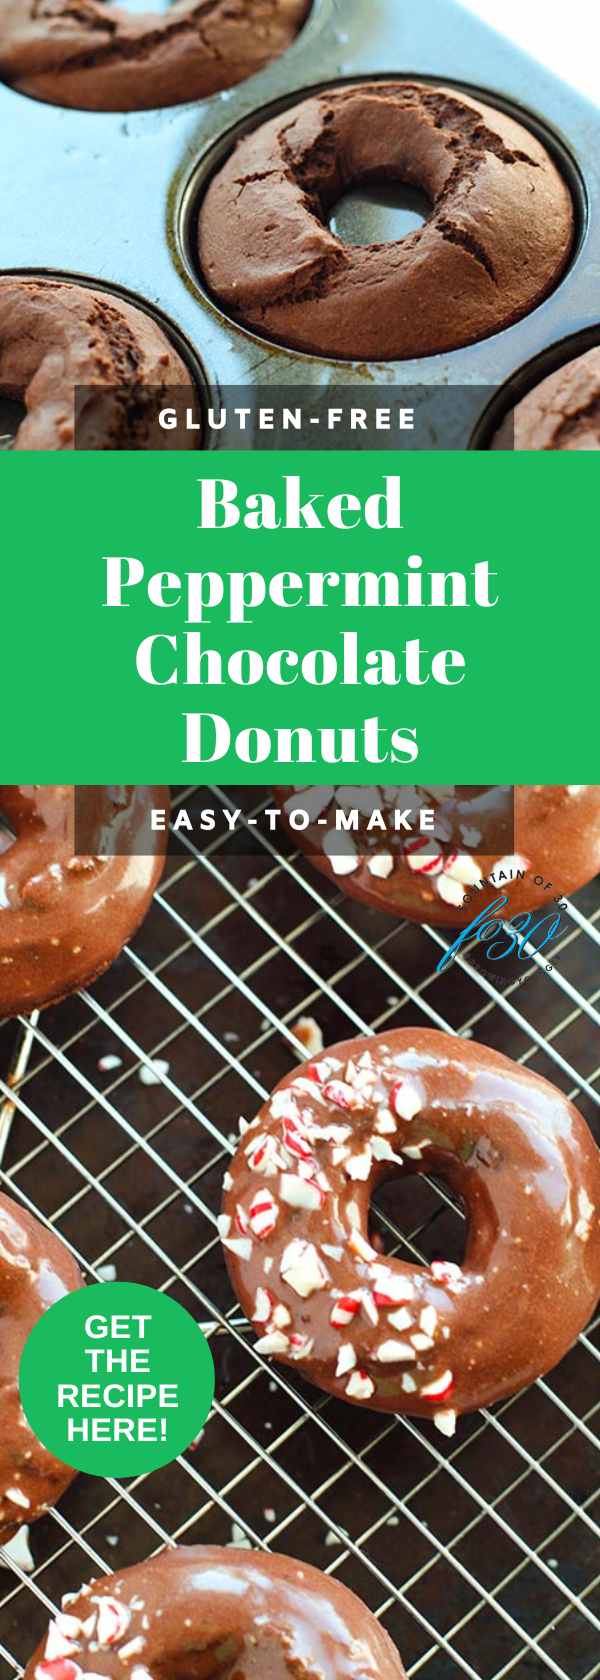 baked peppermint chocolate donuts recipe fountainof30